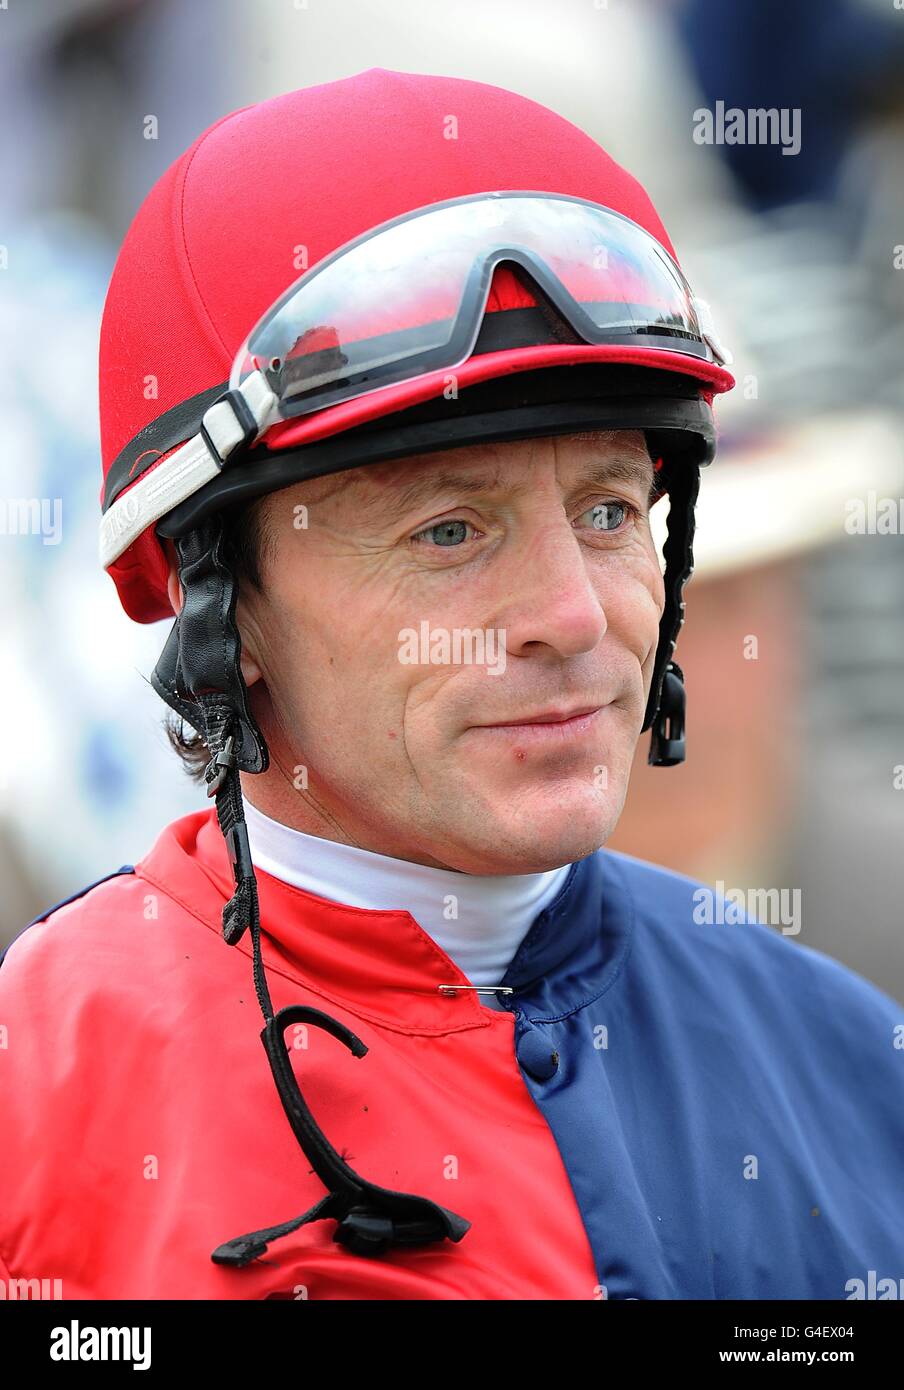 Horse Racing - 2011 Glorious Goodwood Festival - Glorious Totesport Mile Day - Goodwood Racecourse. Jockey Kieren Fallon after winning the Coutts Glorious Stakes on Drunken Sailor Stock Photo